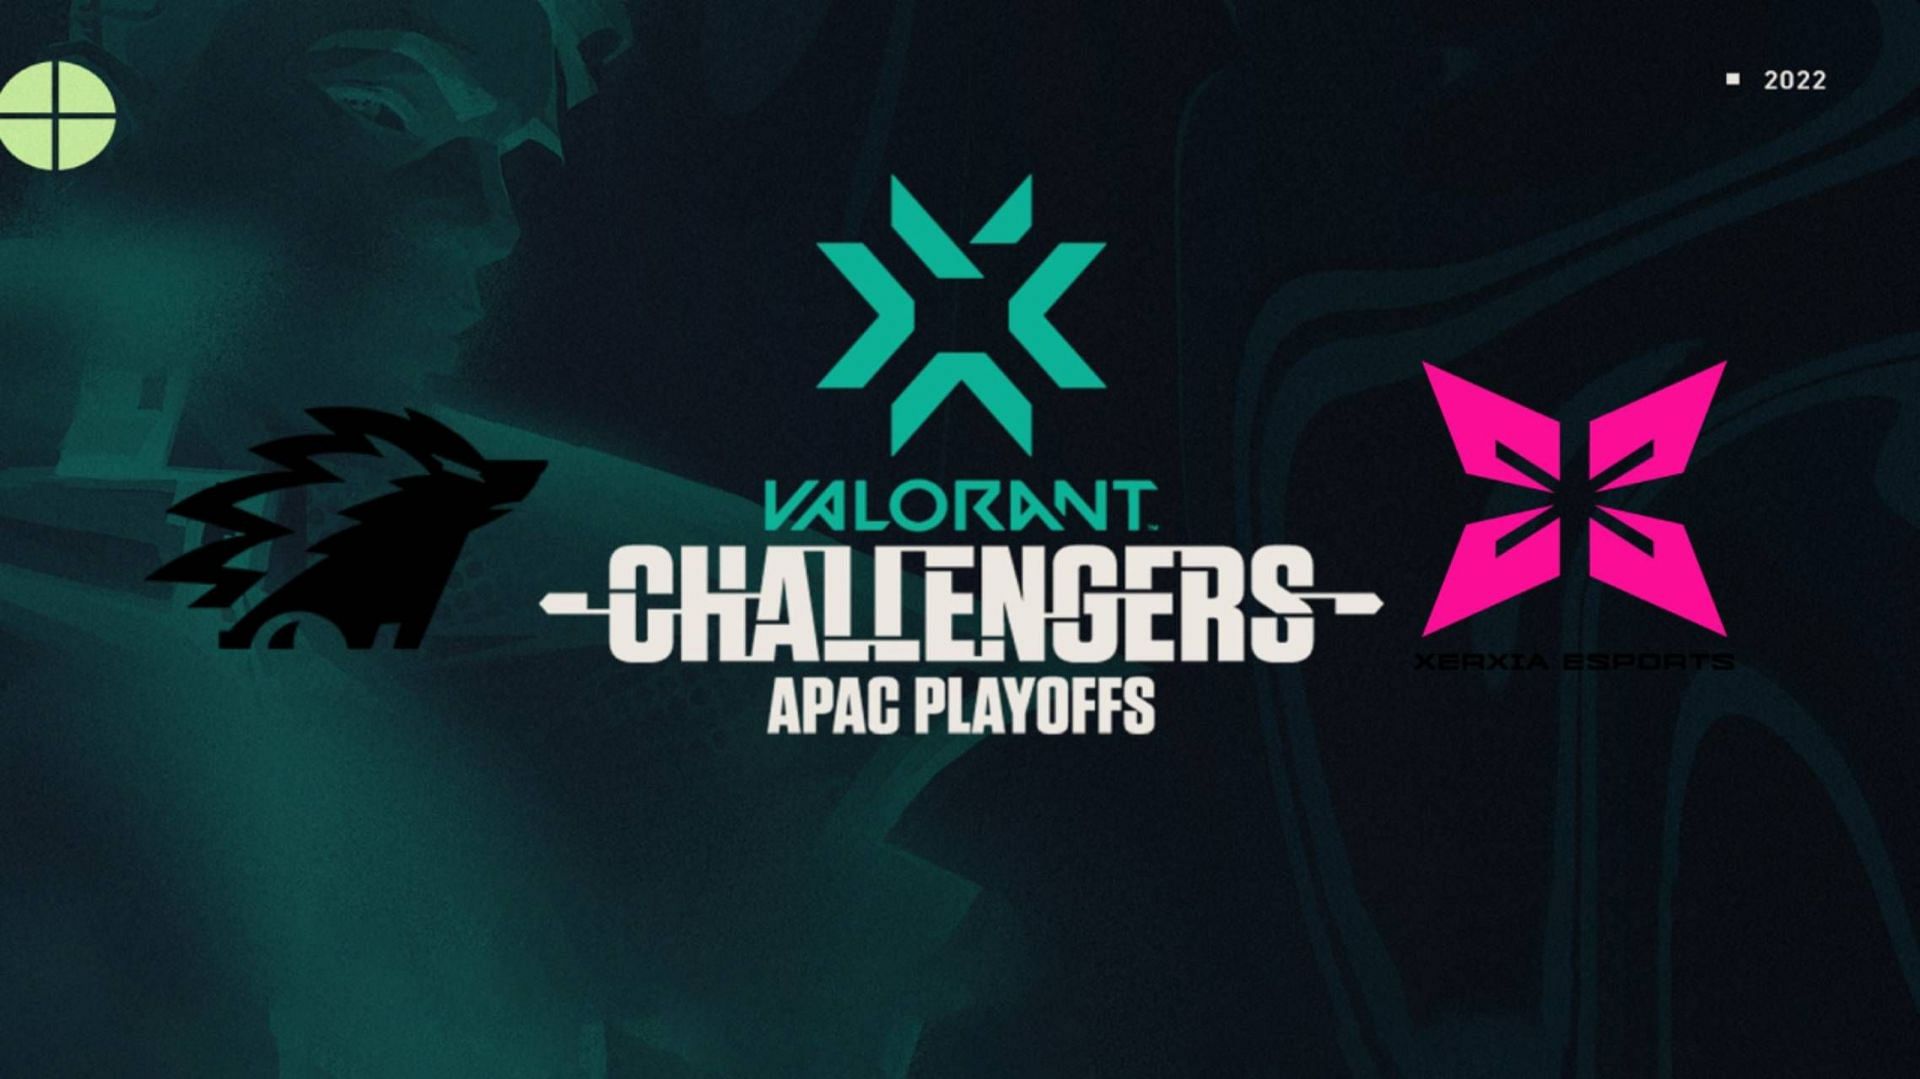 Xerxia Esports and ONIC G in the VCT APAC Stage-1 Challengers (Image via Sportskeeda)